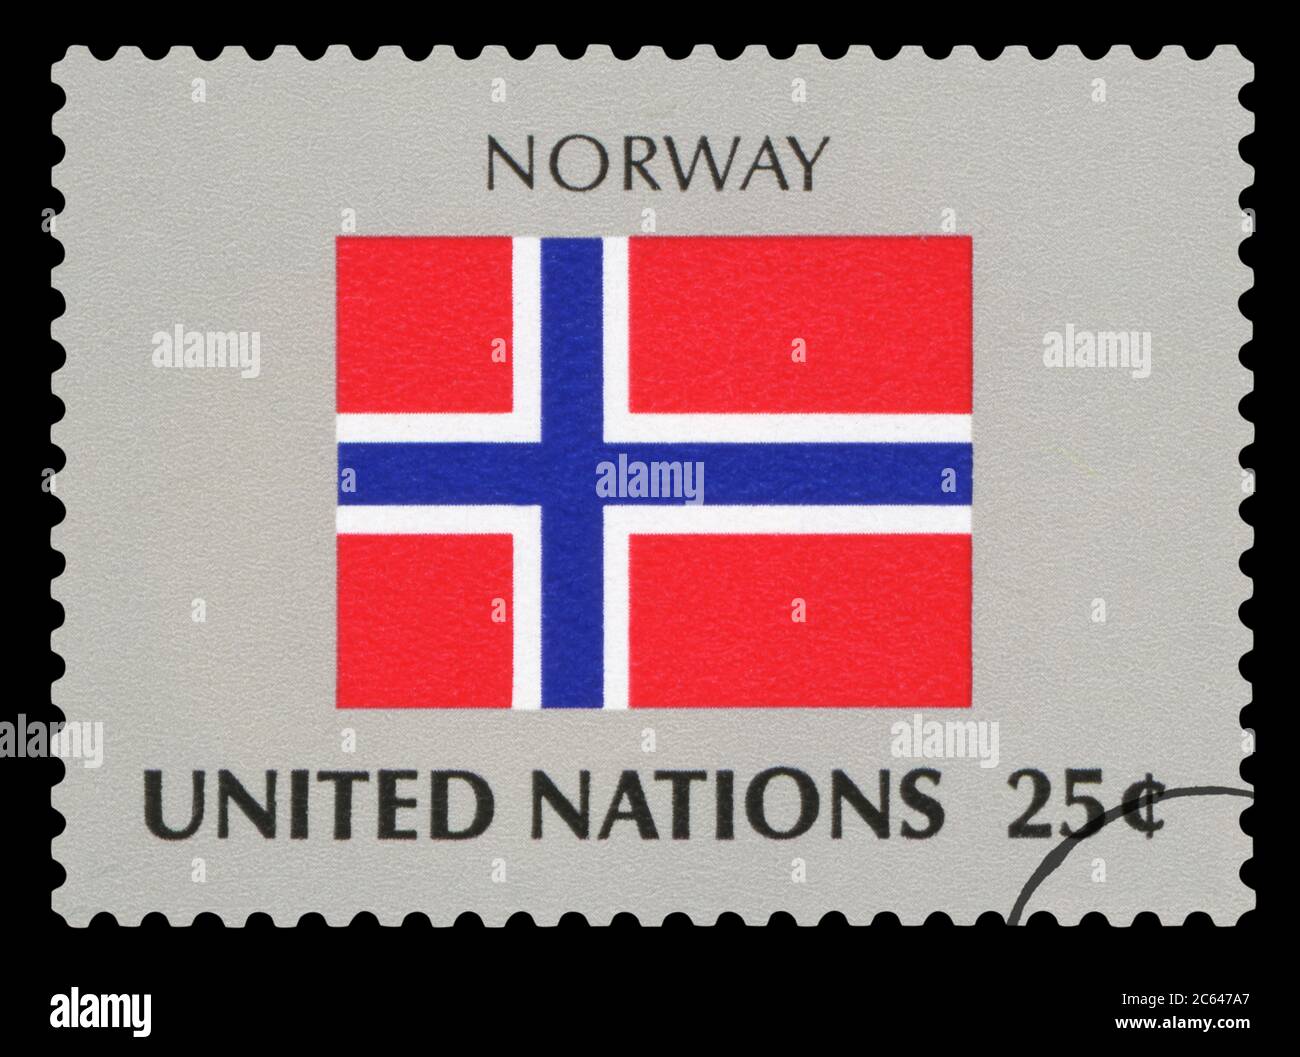 NORWAY - Postage Stamp of Norway national flag, Series of United Nations, circa 1984. Stock Photo